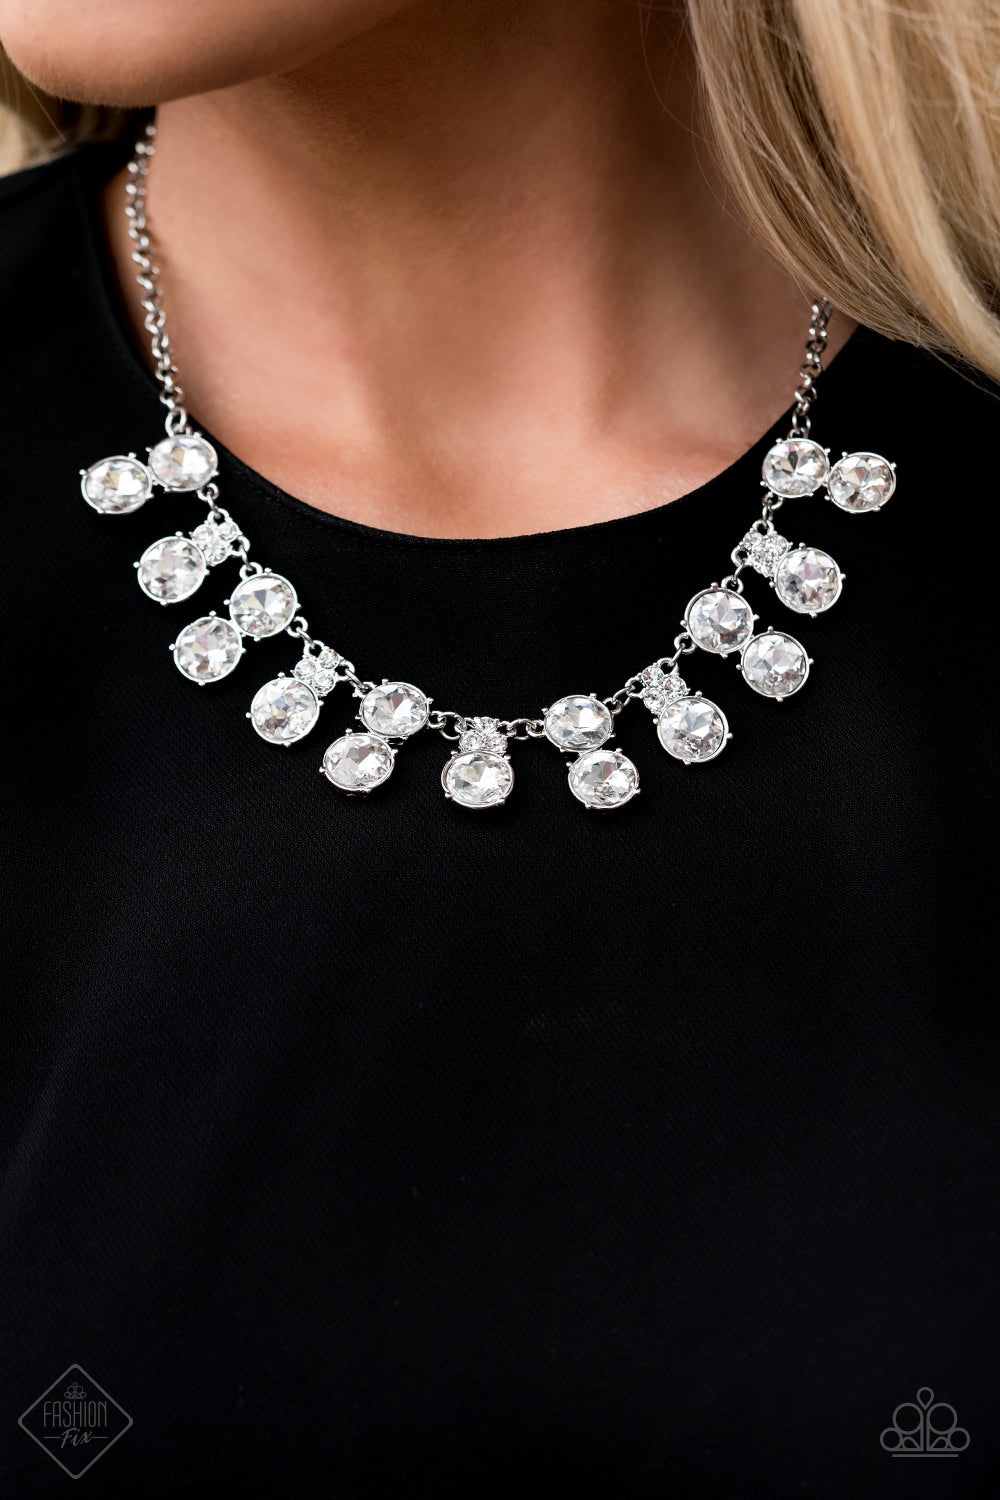 Top Dollar Twinkle White Necklace Paparazzi Accessories